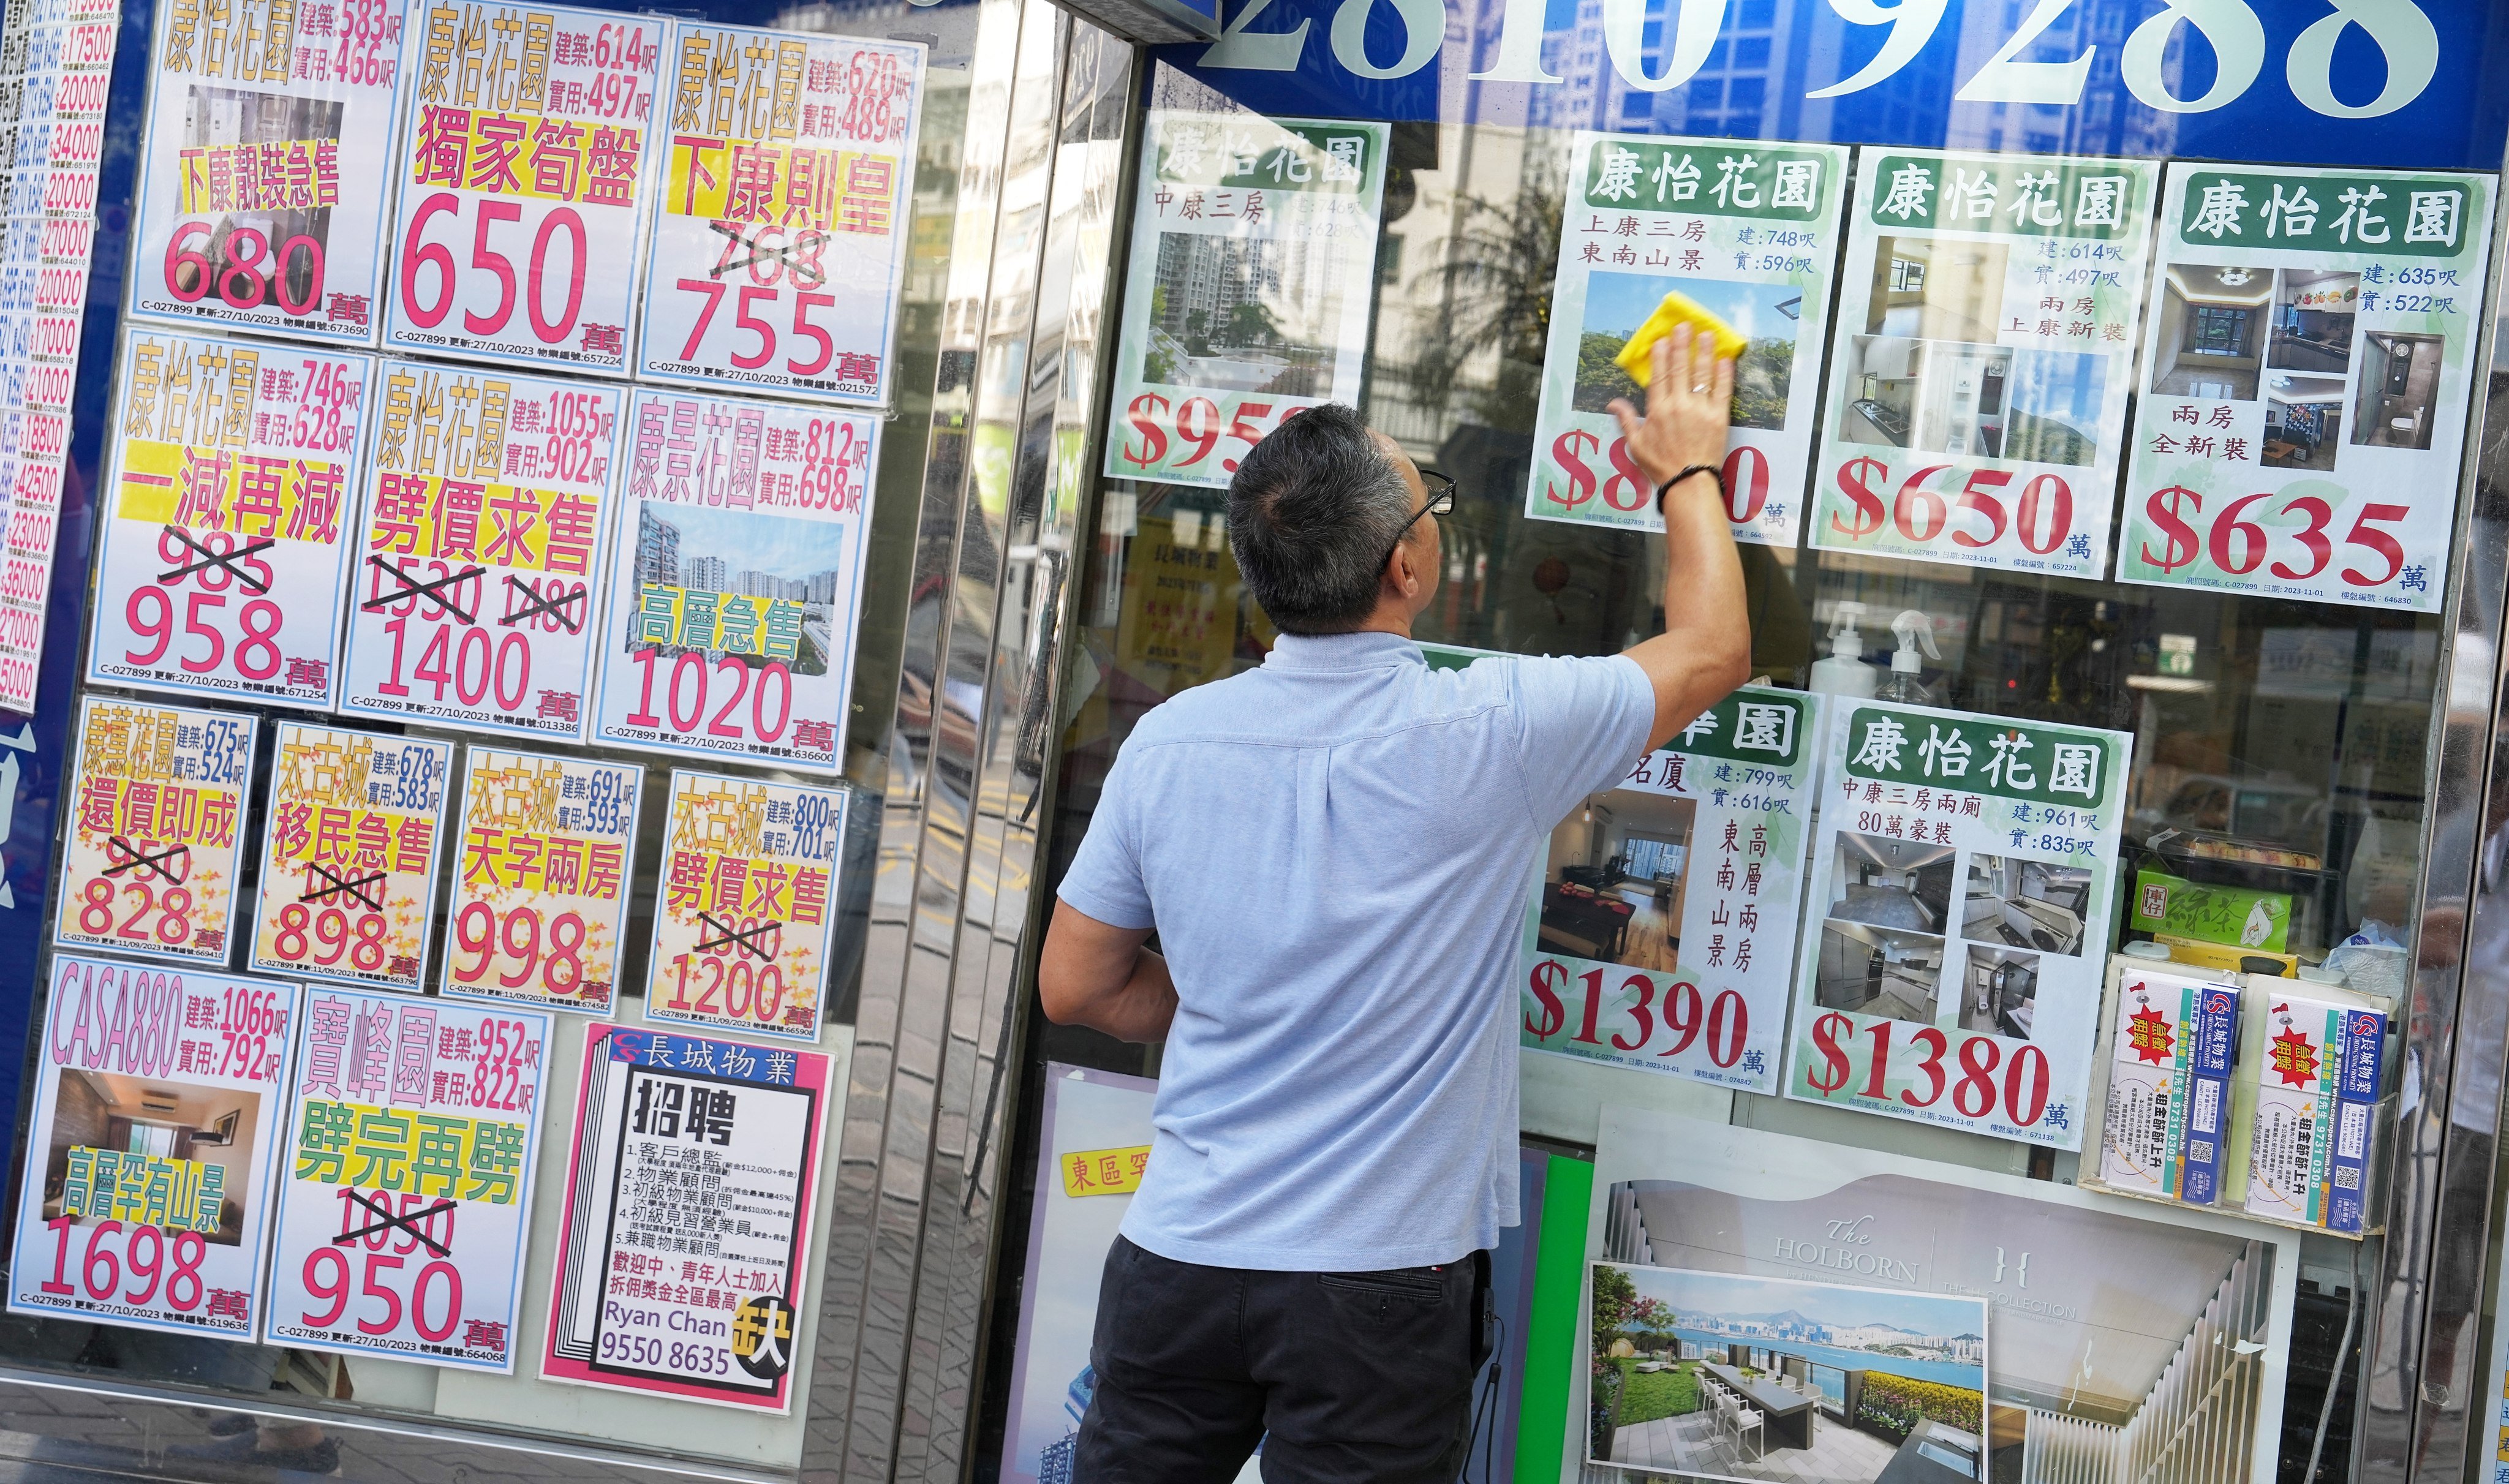 Property listings are displayed on the window of a real estate agency in Quarry Bay. Photo: Elson Li